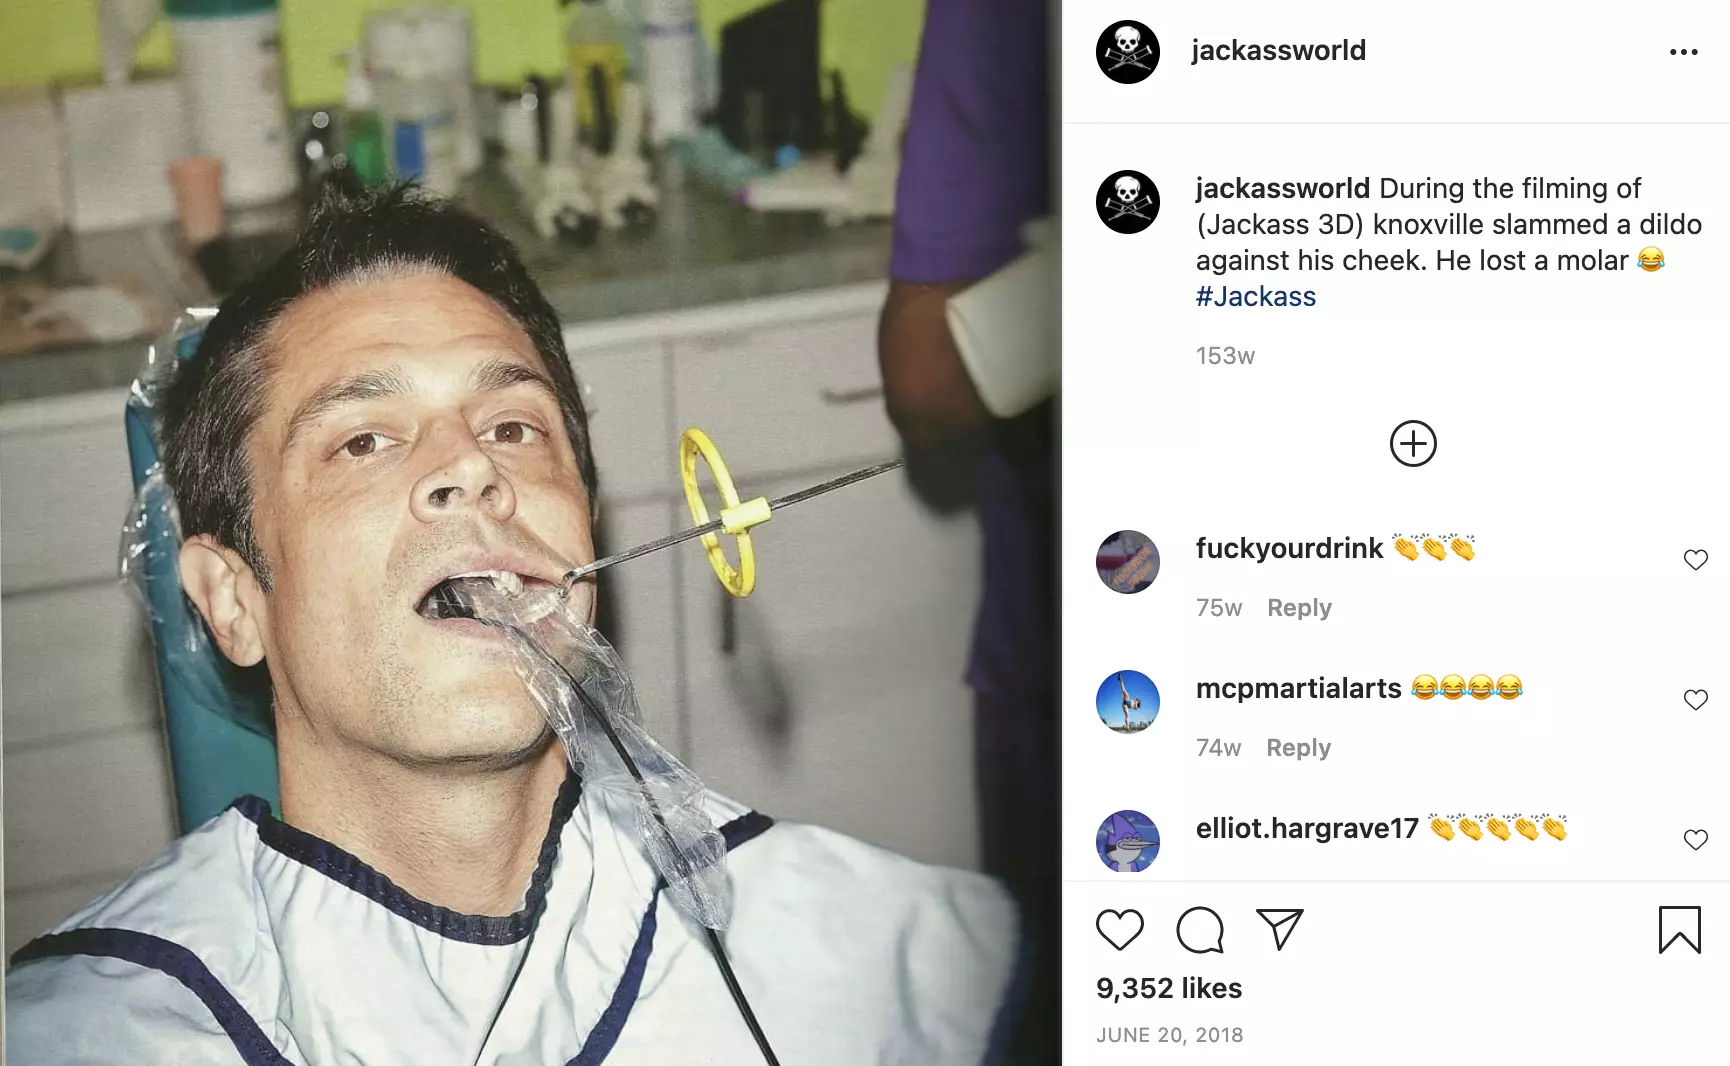 Johnny Knoxville lost a molar during the filming of Jackass 3 (Credit:Instagram/jackassworld)